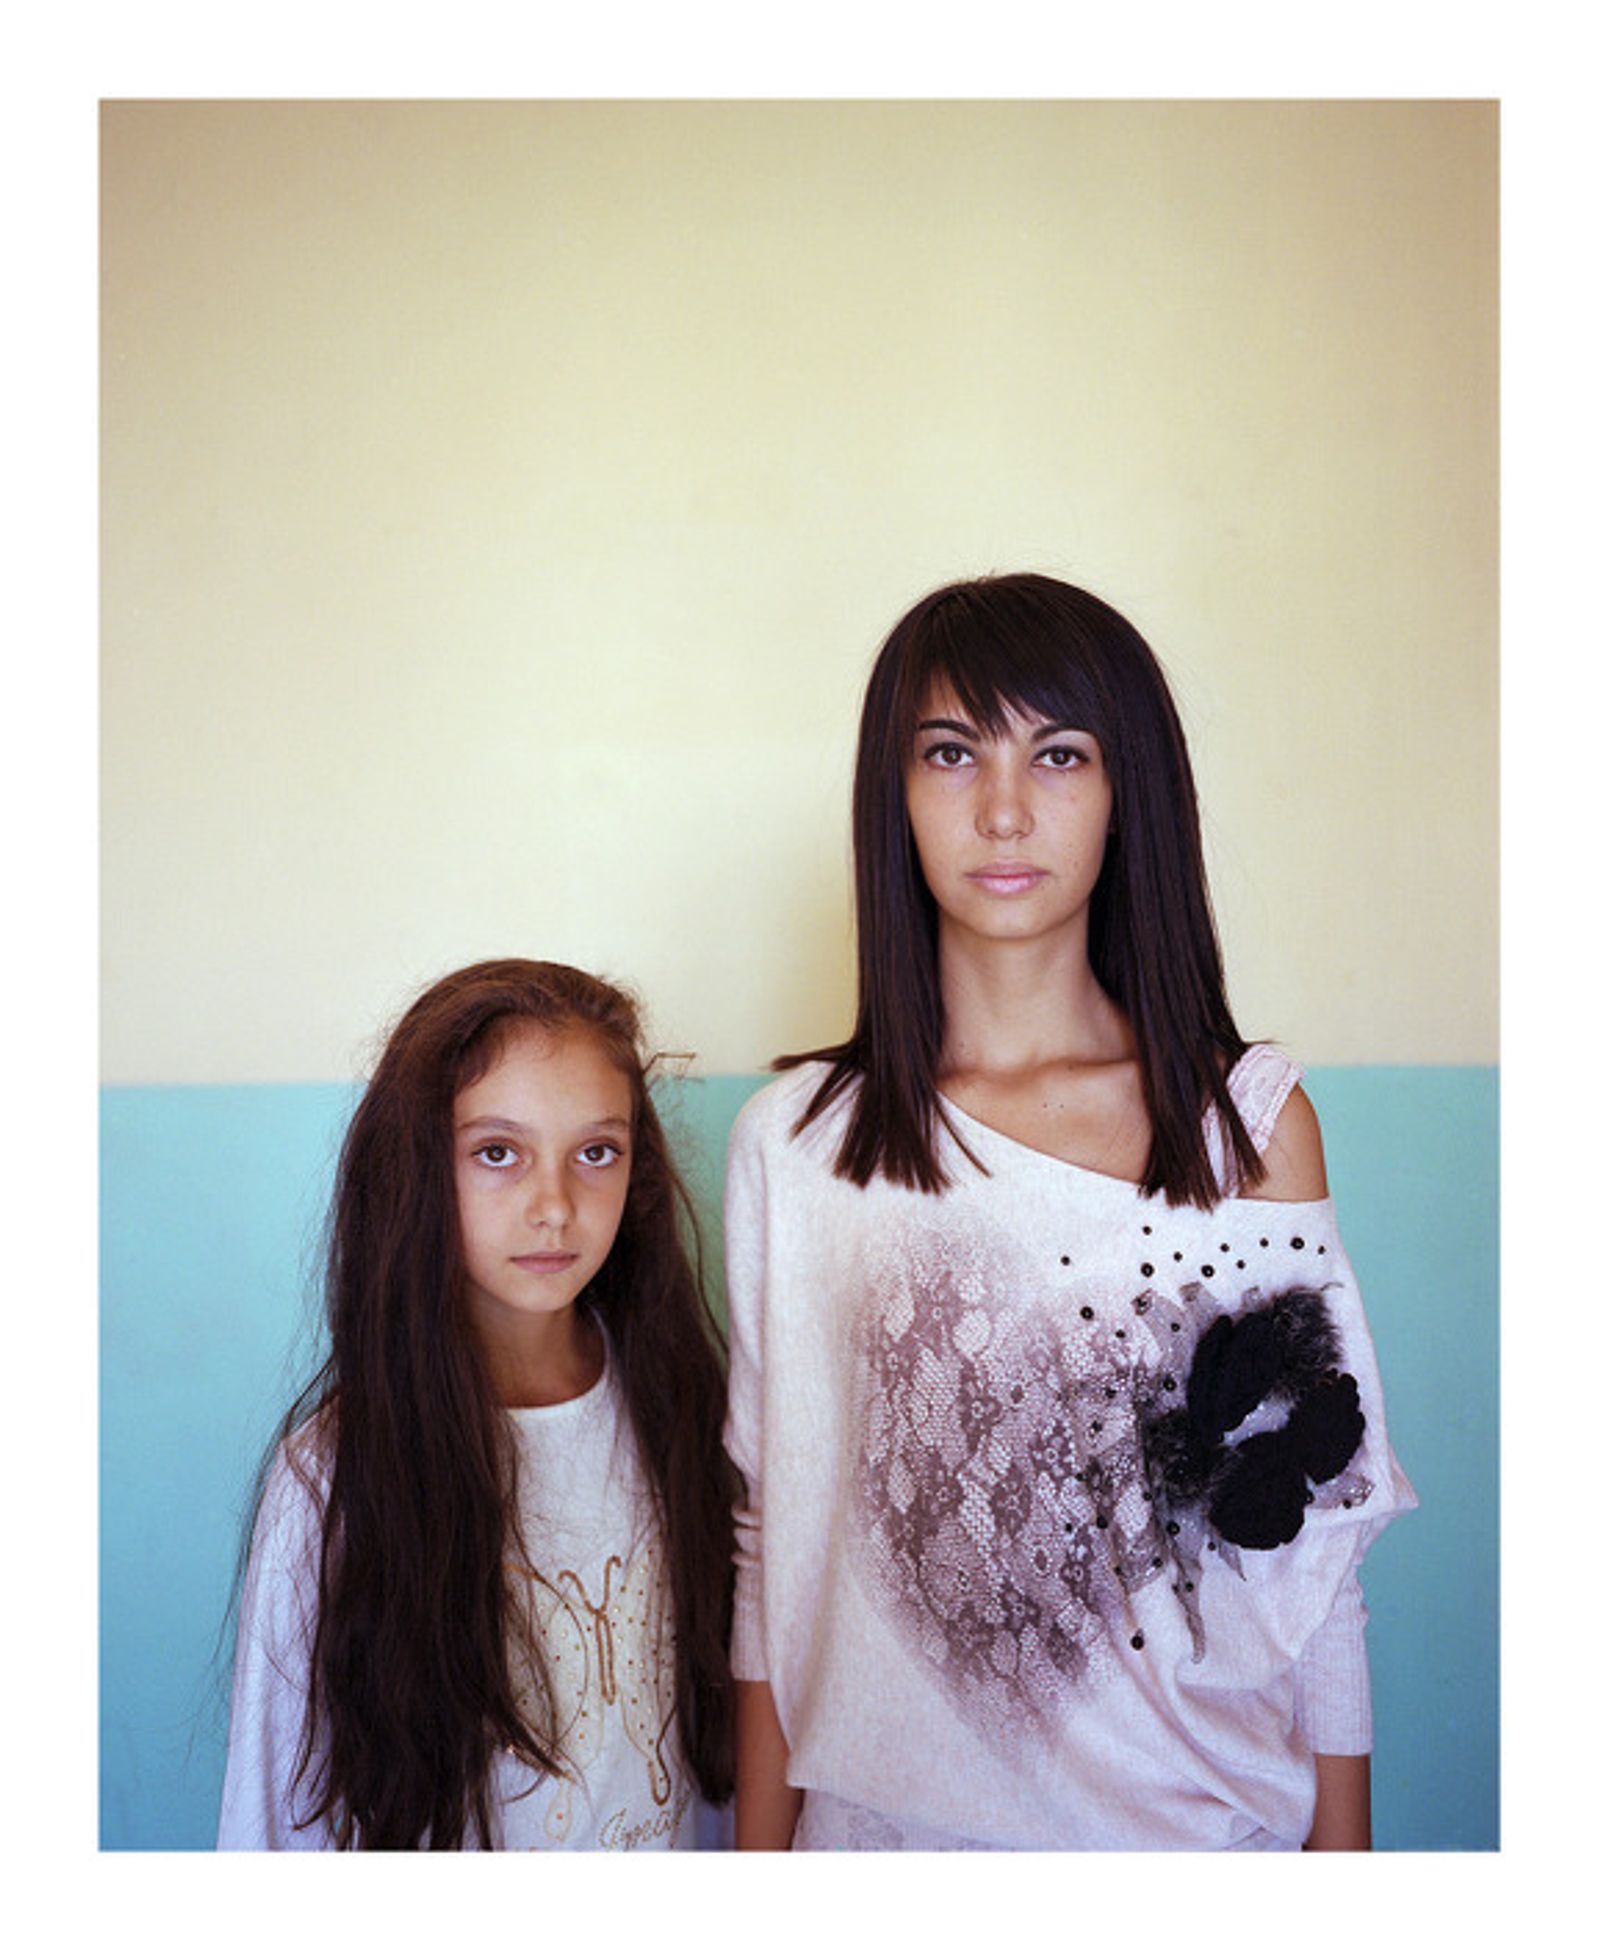 © George Voulgaropoulos - Image from the Son of a Bulgarian photography project